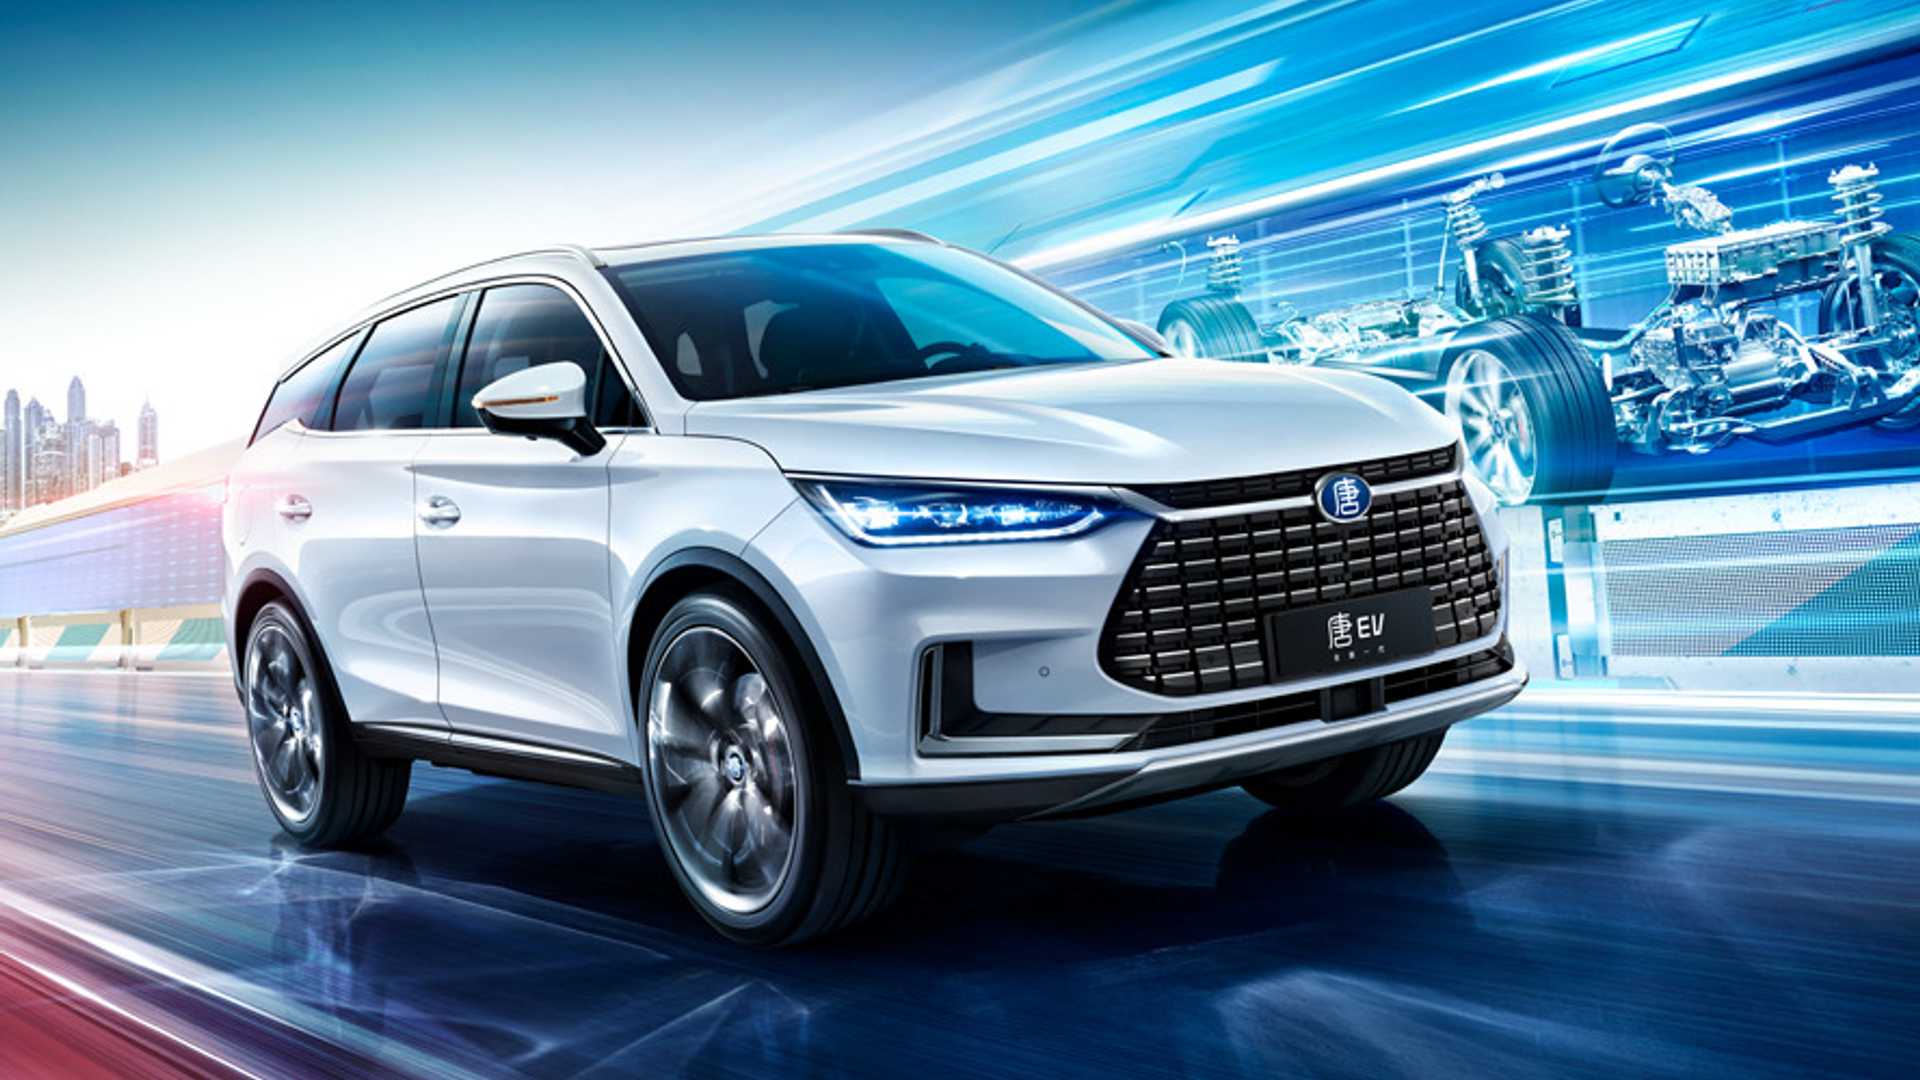 BYD Tang 600 & 600D Electric SUV: Specs Image Videos